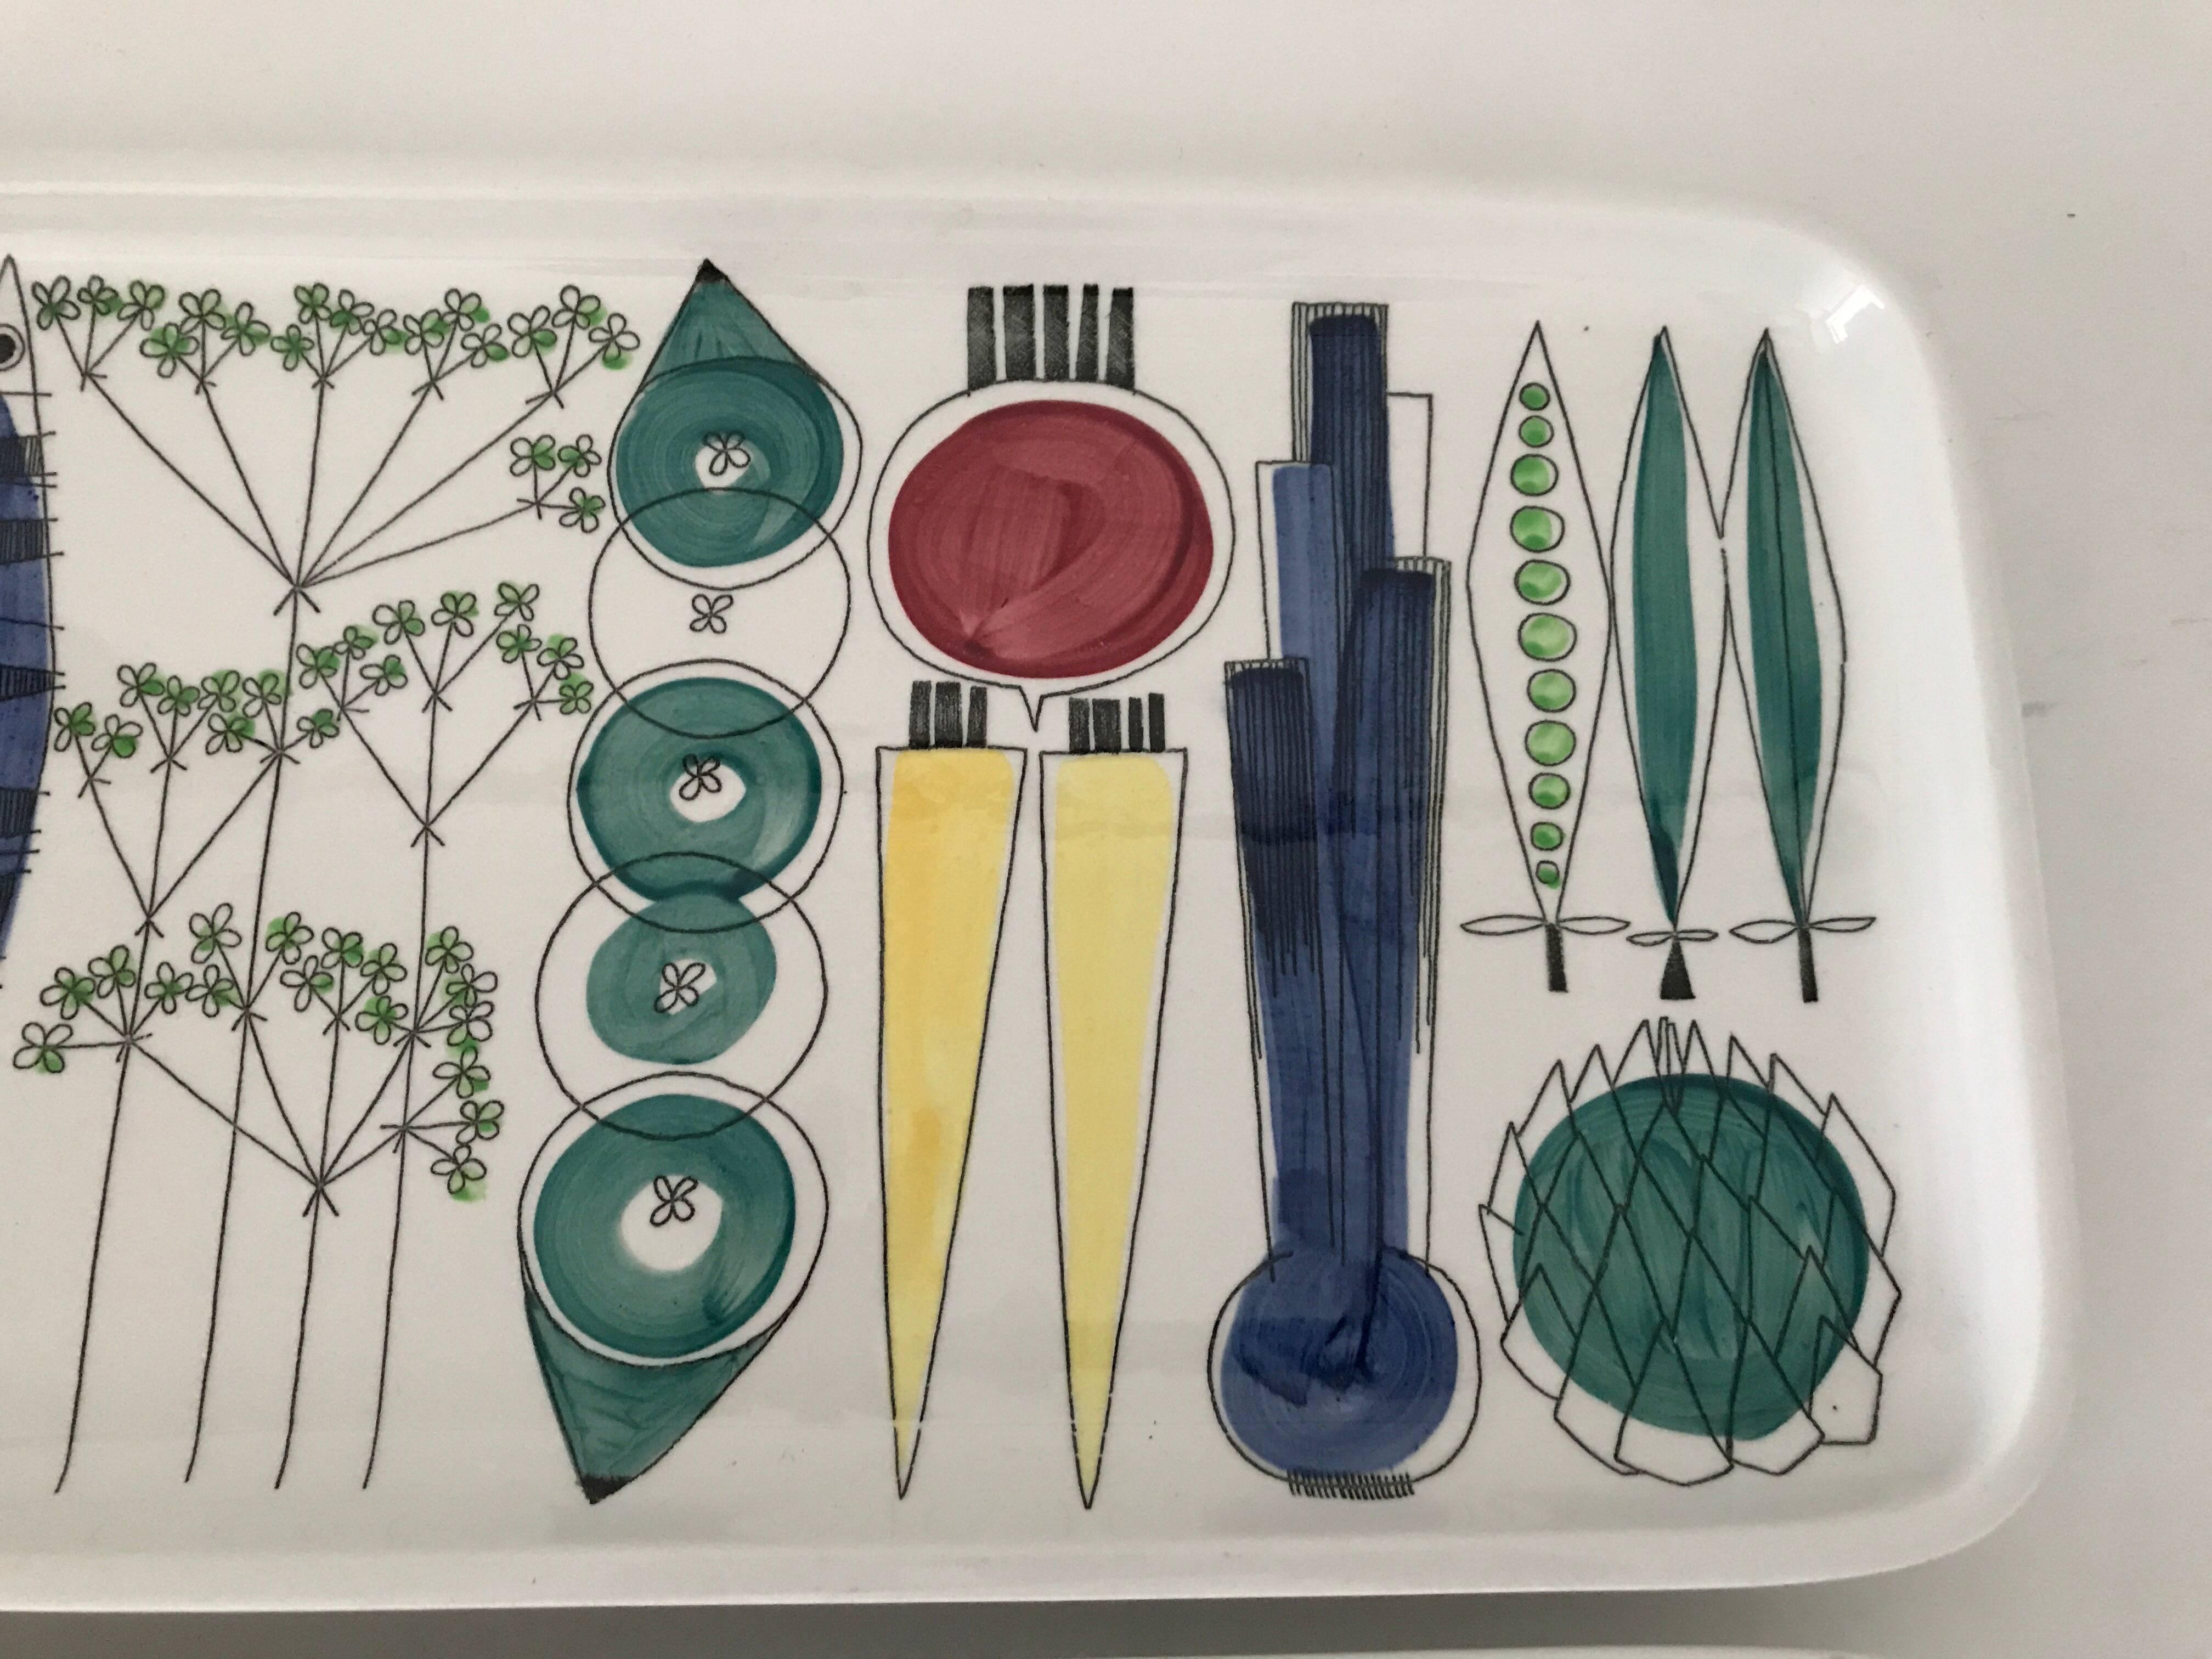 Swedish Rörstrand and Marianne Westman Picknick porcelain tray two available.
A beautiful porcelain tray made at the high end porcelain factory of Rörstrand. This series called Picknick is designed by one of the most popular porcelain designers